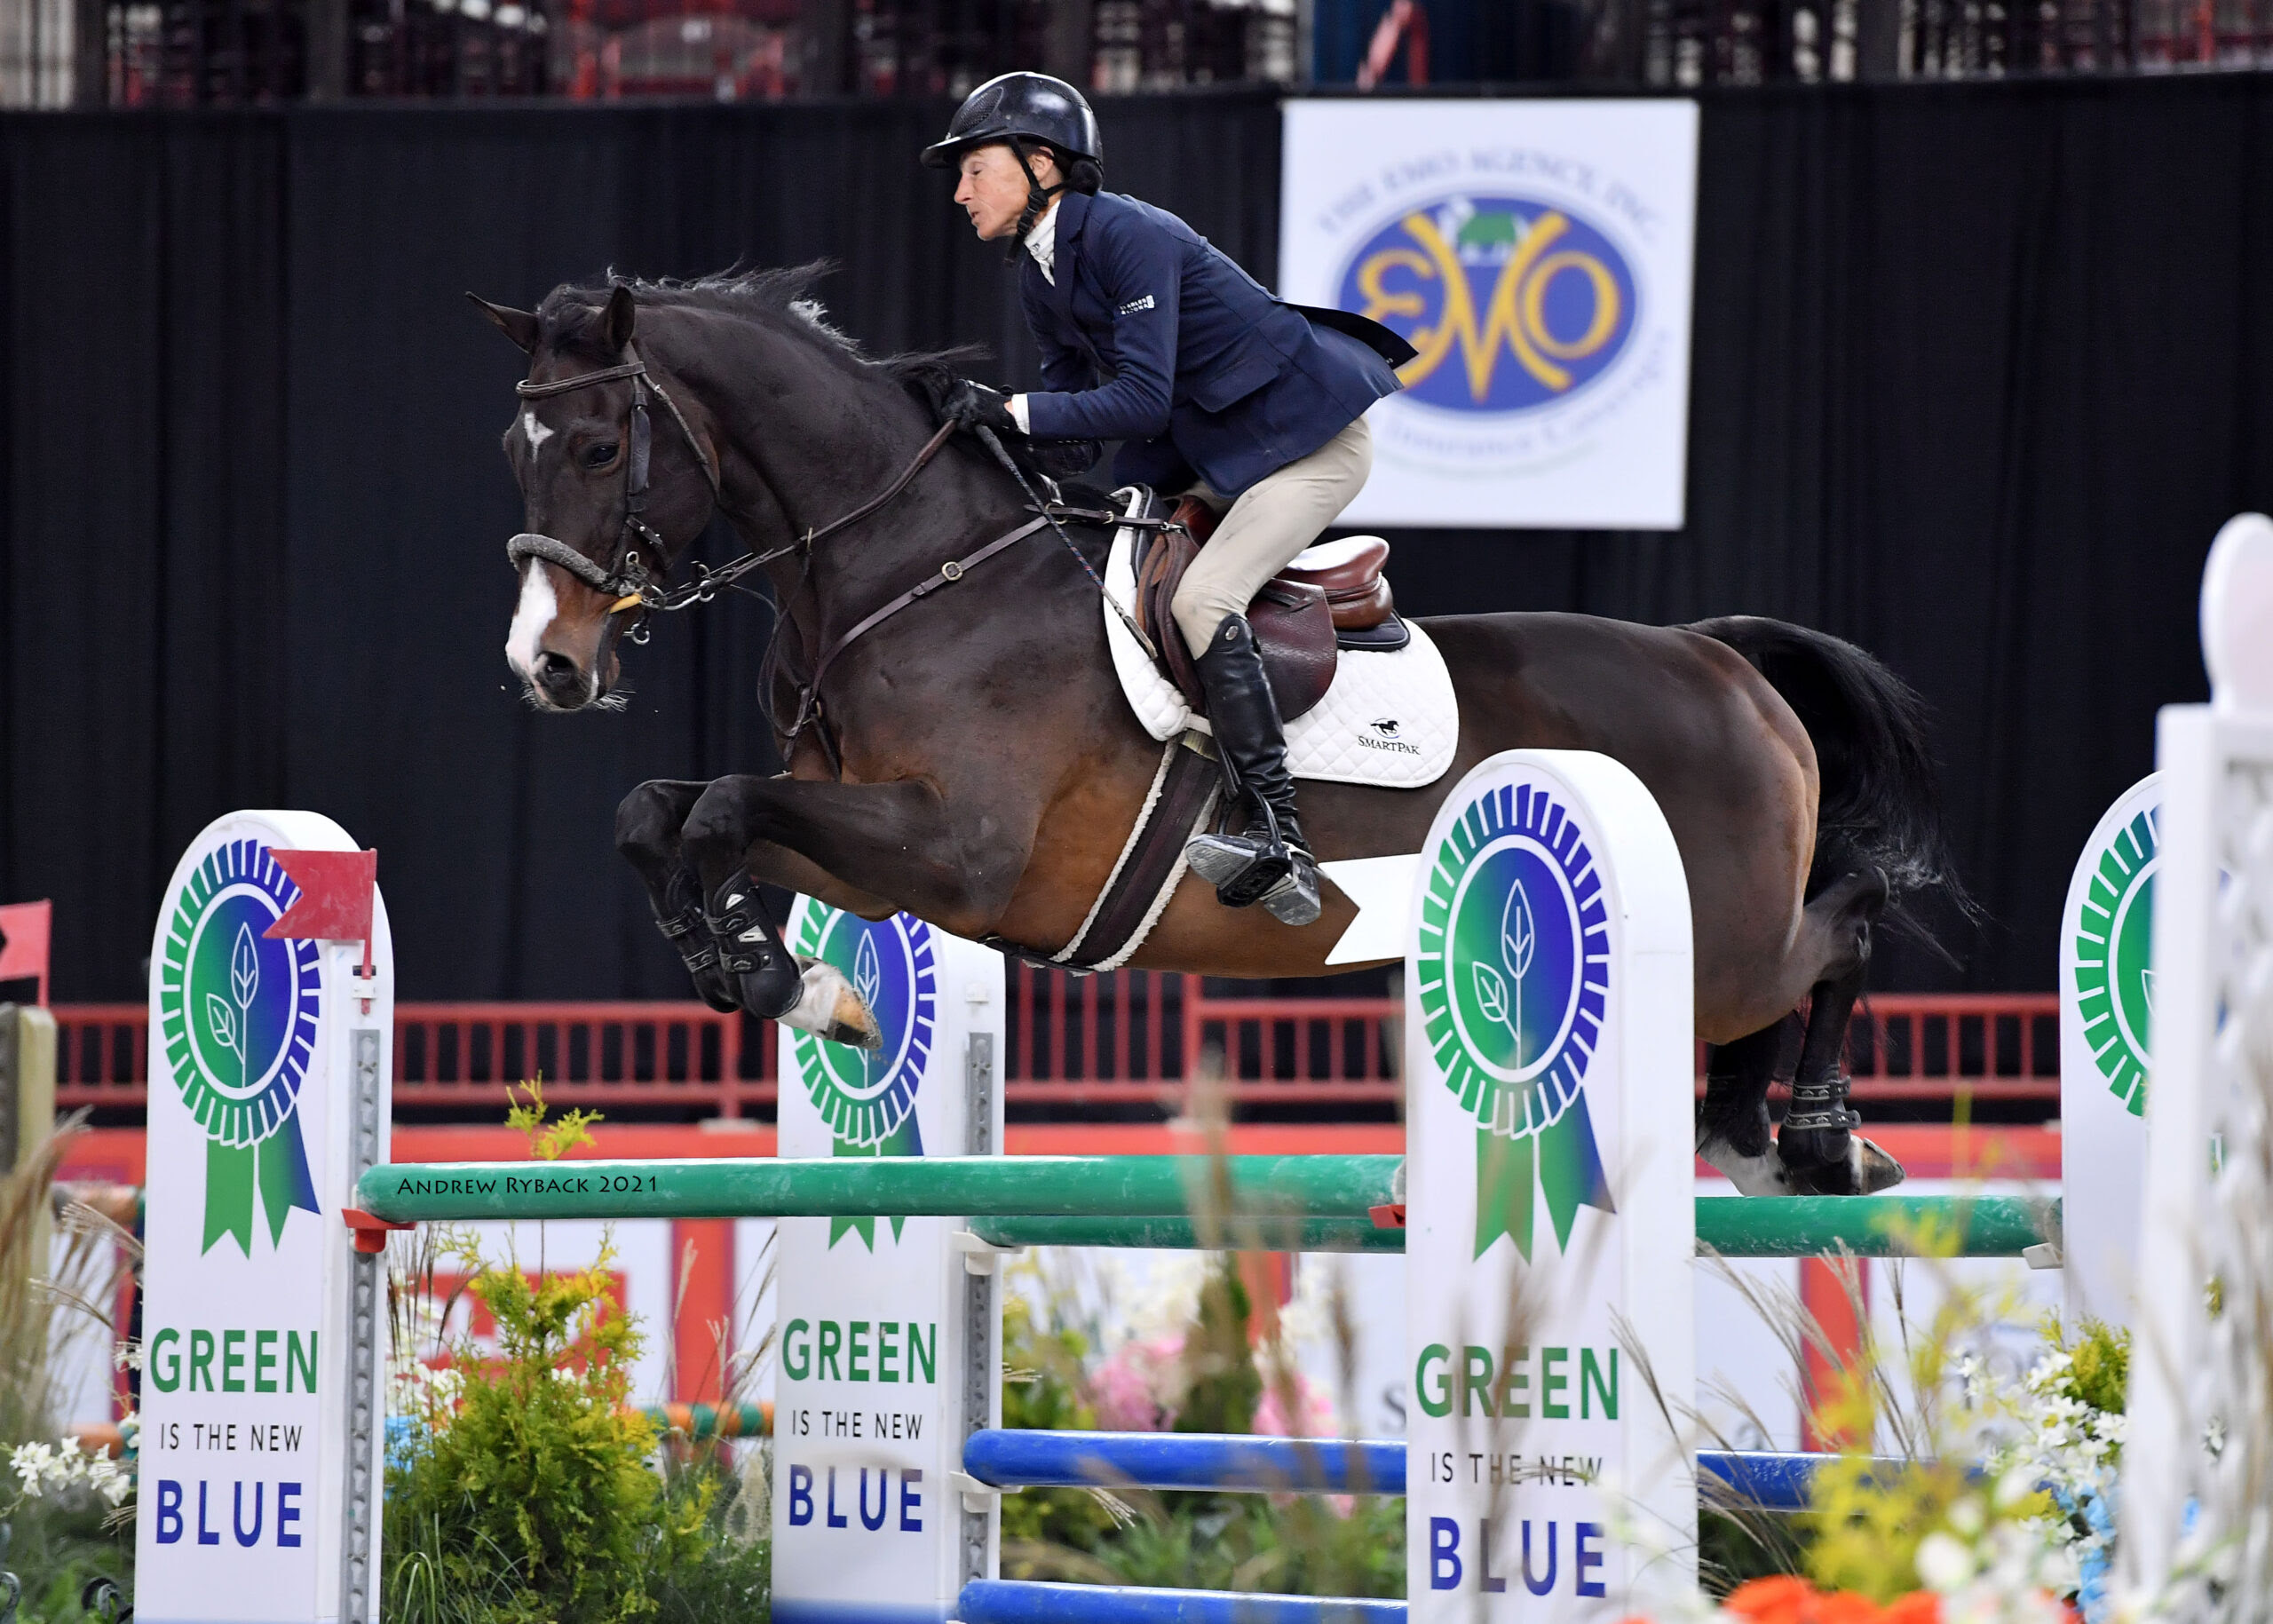 Laura Chapot Leads the Way at 75th-Annual Pennsylvania National Horse Show